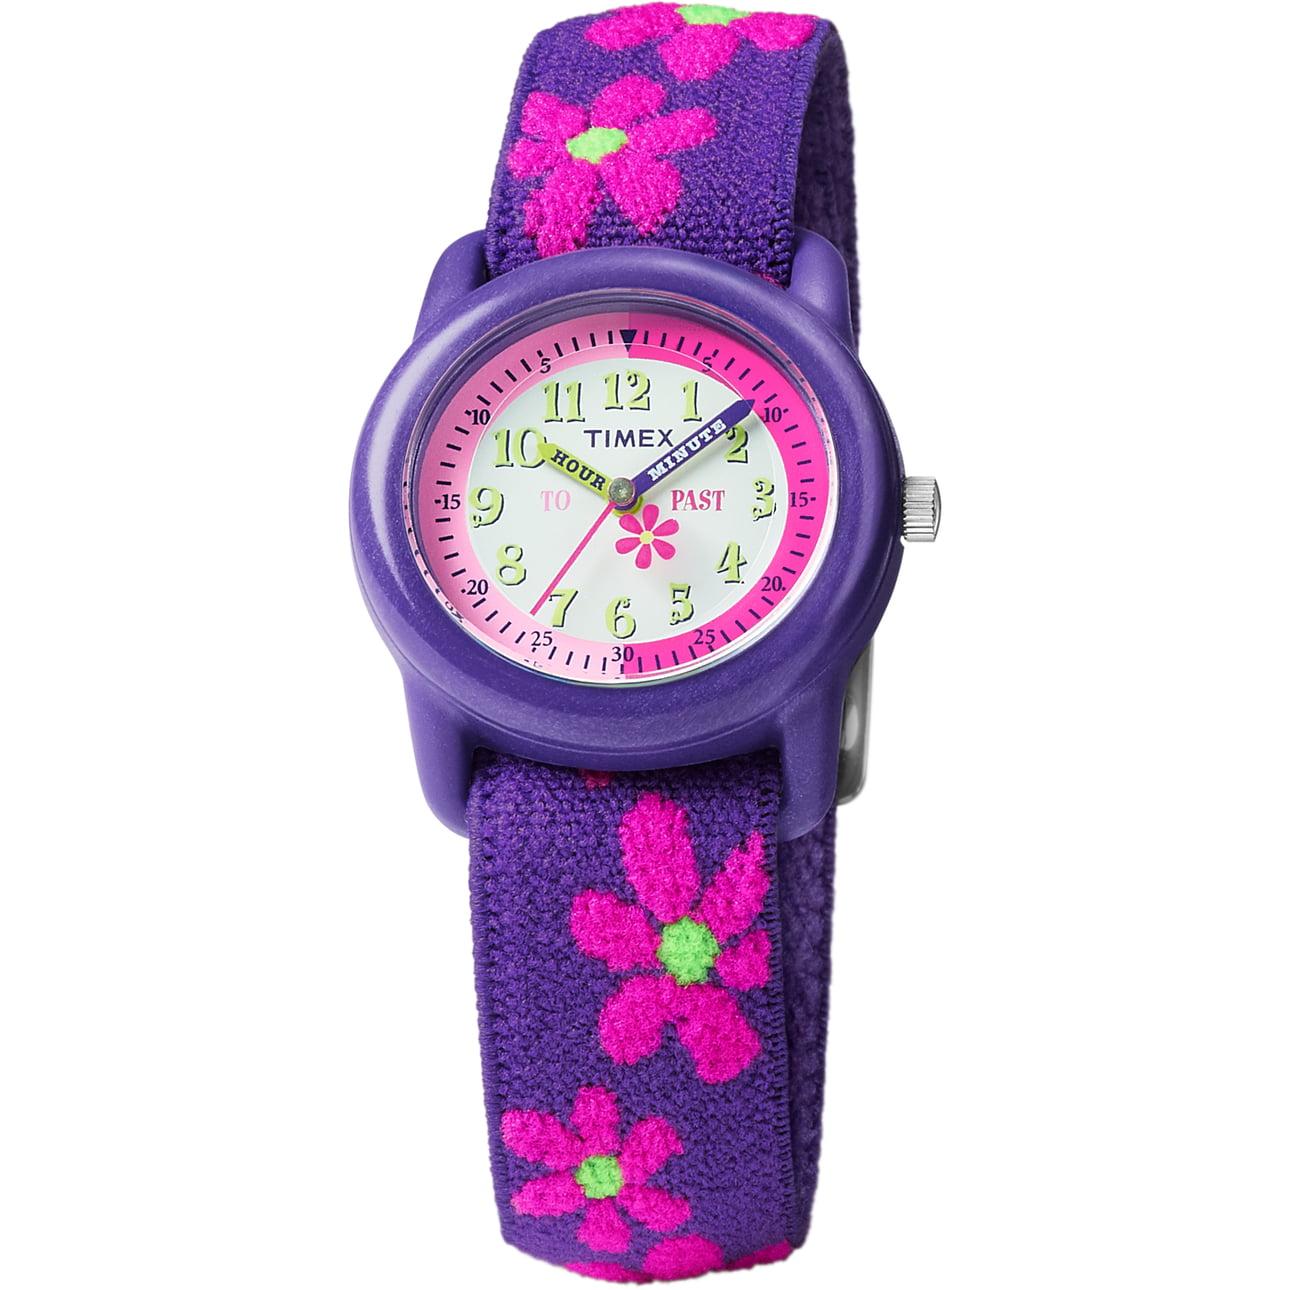 Kids' Purple/Floral Analog Watch with Elastic Strap